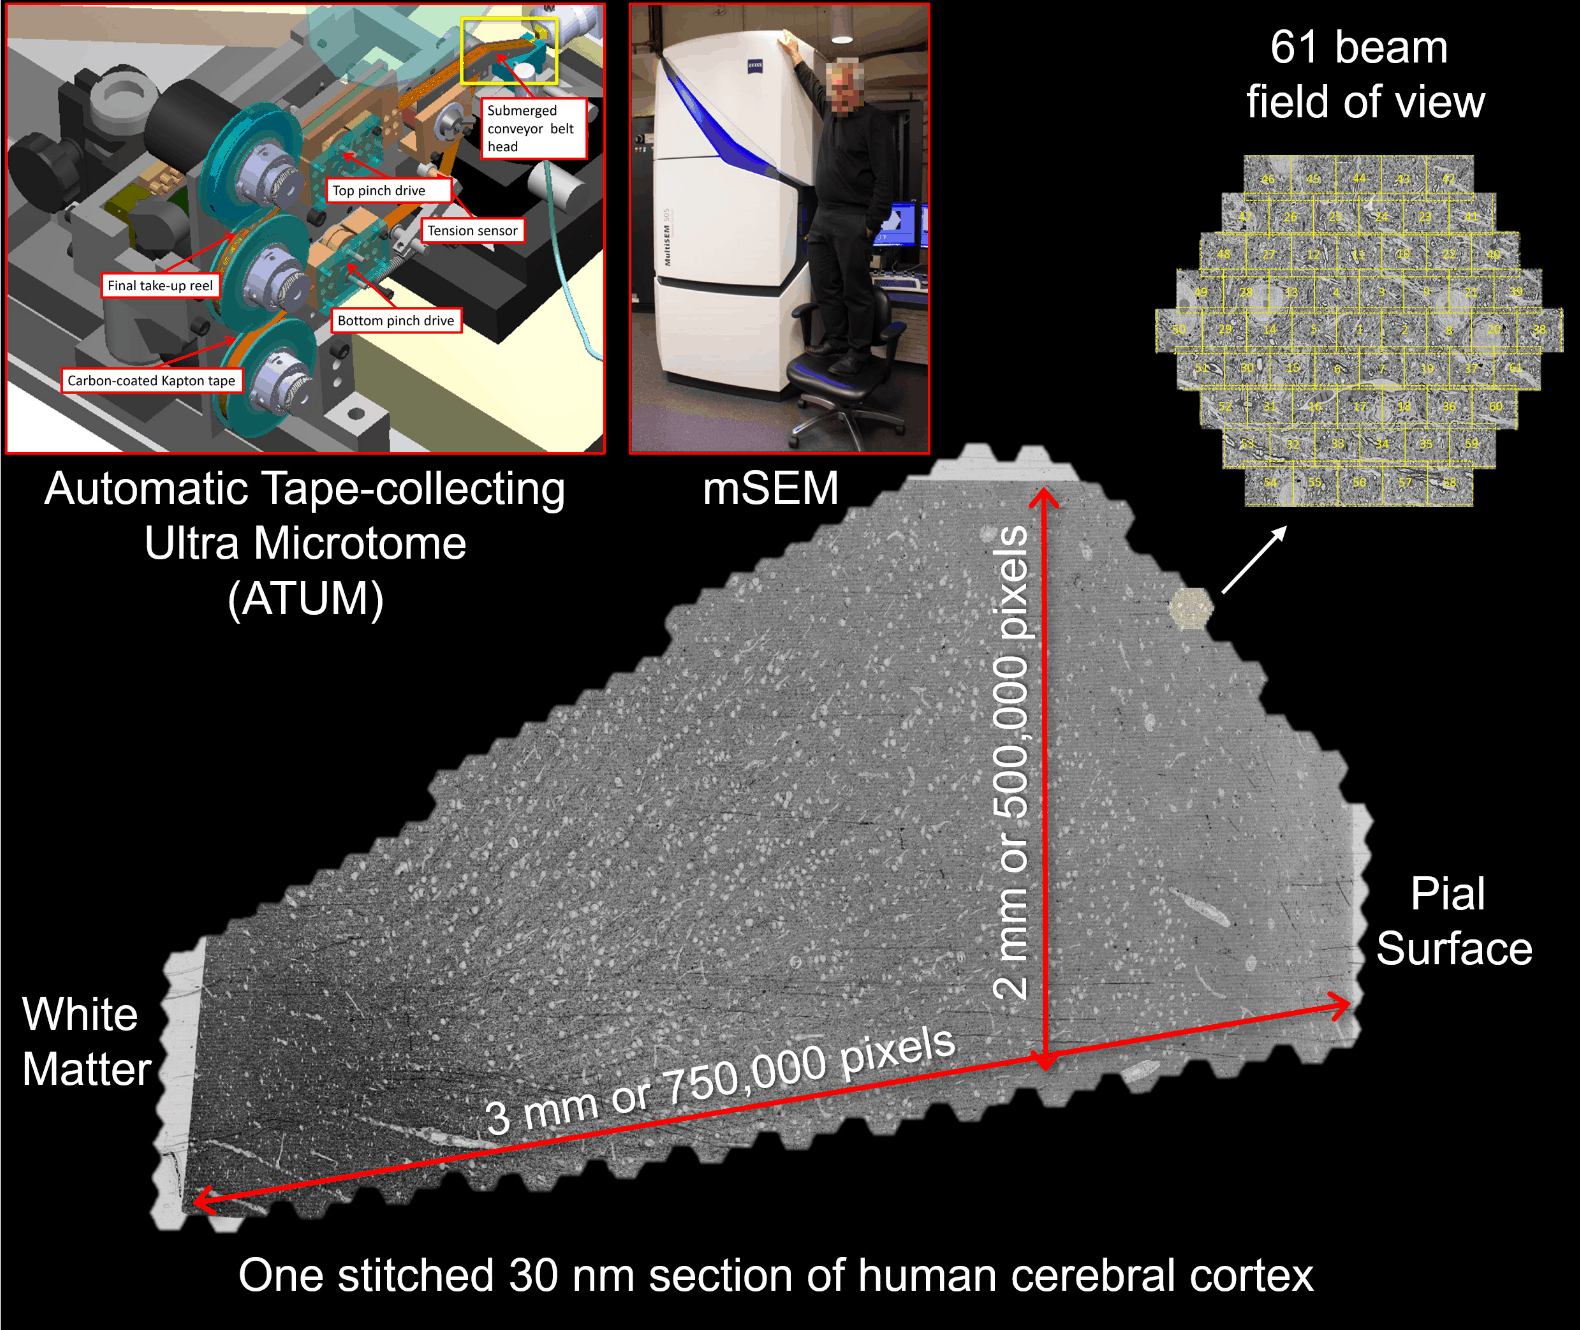 Figure 1: Image acquisition for the human brain sample. A fresh surgical cerebral cortex sample was rapidly preserved, then stained, embedded in resin, and sectioned. More than 5000 sequential ~30 nm sections were collected on tape using an ATUM [Automatic Tape-collecting Ultra-Microtome] (upper left panel). Yellow box shows the site where the brain sample is cut with the diamond knife and thin sections are collected onto the tape. The tape was then cut into strips and imaged in a multibeam scanning electron microscope (mSEM). This large machine (see middle panel with person on chair as reference) uses 61 beams that image a hexagonal area of about ~10,000 μm2 simultaneously (see upper right). For each thin section, all the resulting tiles are then stitched together. One such stitched section is shown (bottom). This section is about 4 mm2 in area and was imaged with 4×4 nm2 pixels. Given the necessity of some overlap between the stitched tiles, this single section required collection of more than 300 GB of data.